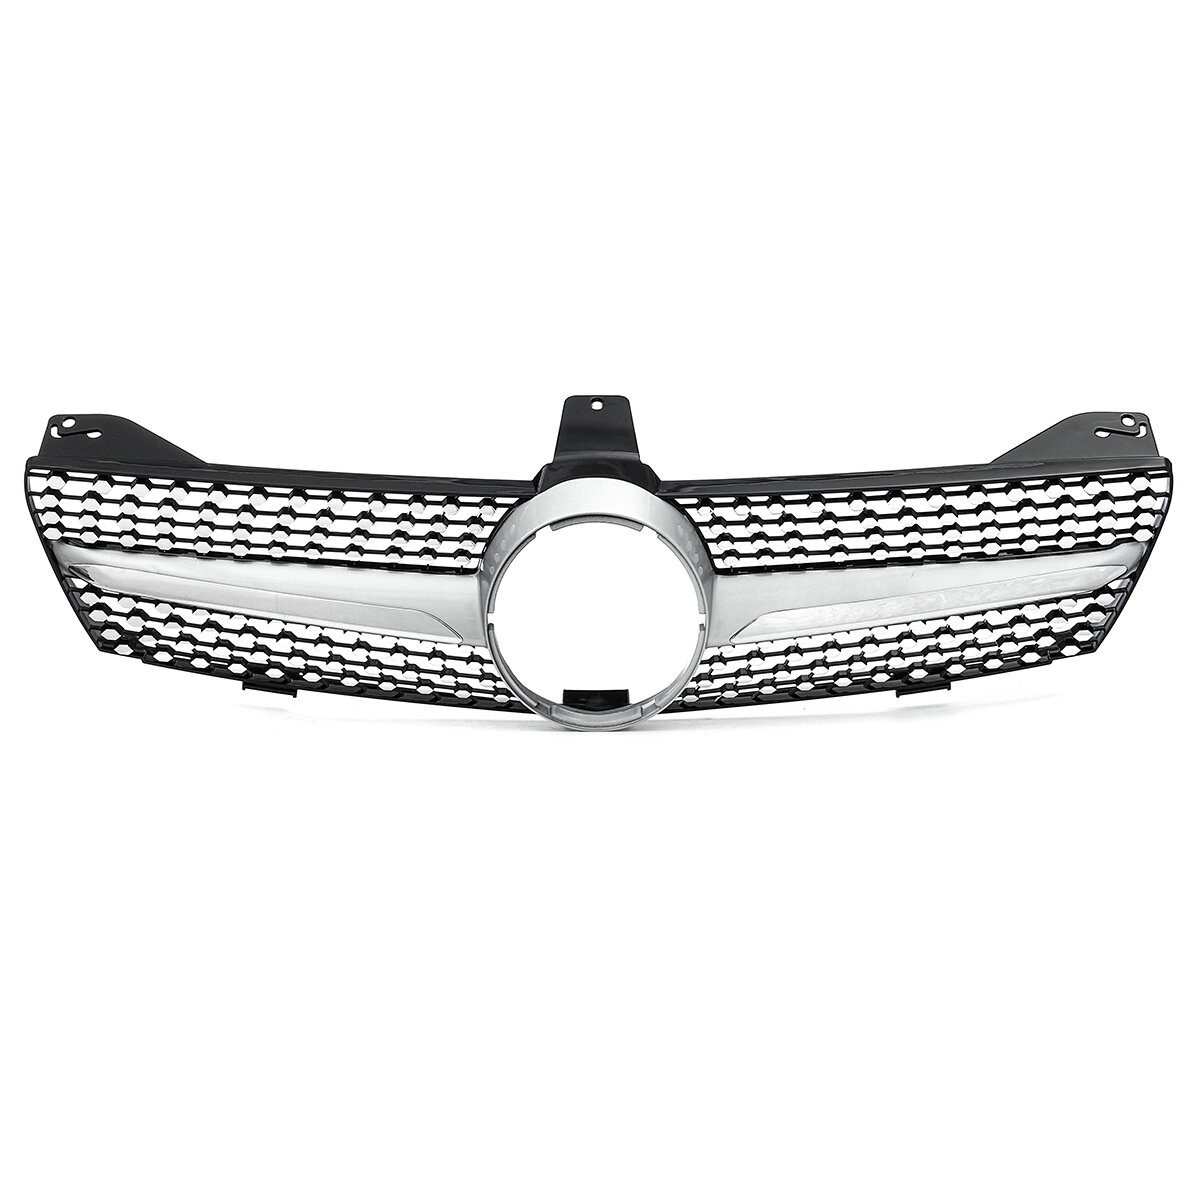 Diamond Grille Grill Chrome Voor Mercedes Benz W219 CLS500 CLS600 2005-2008